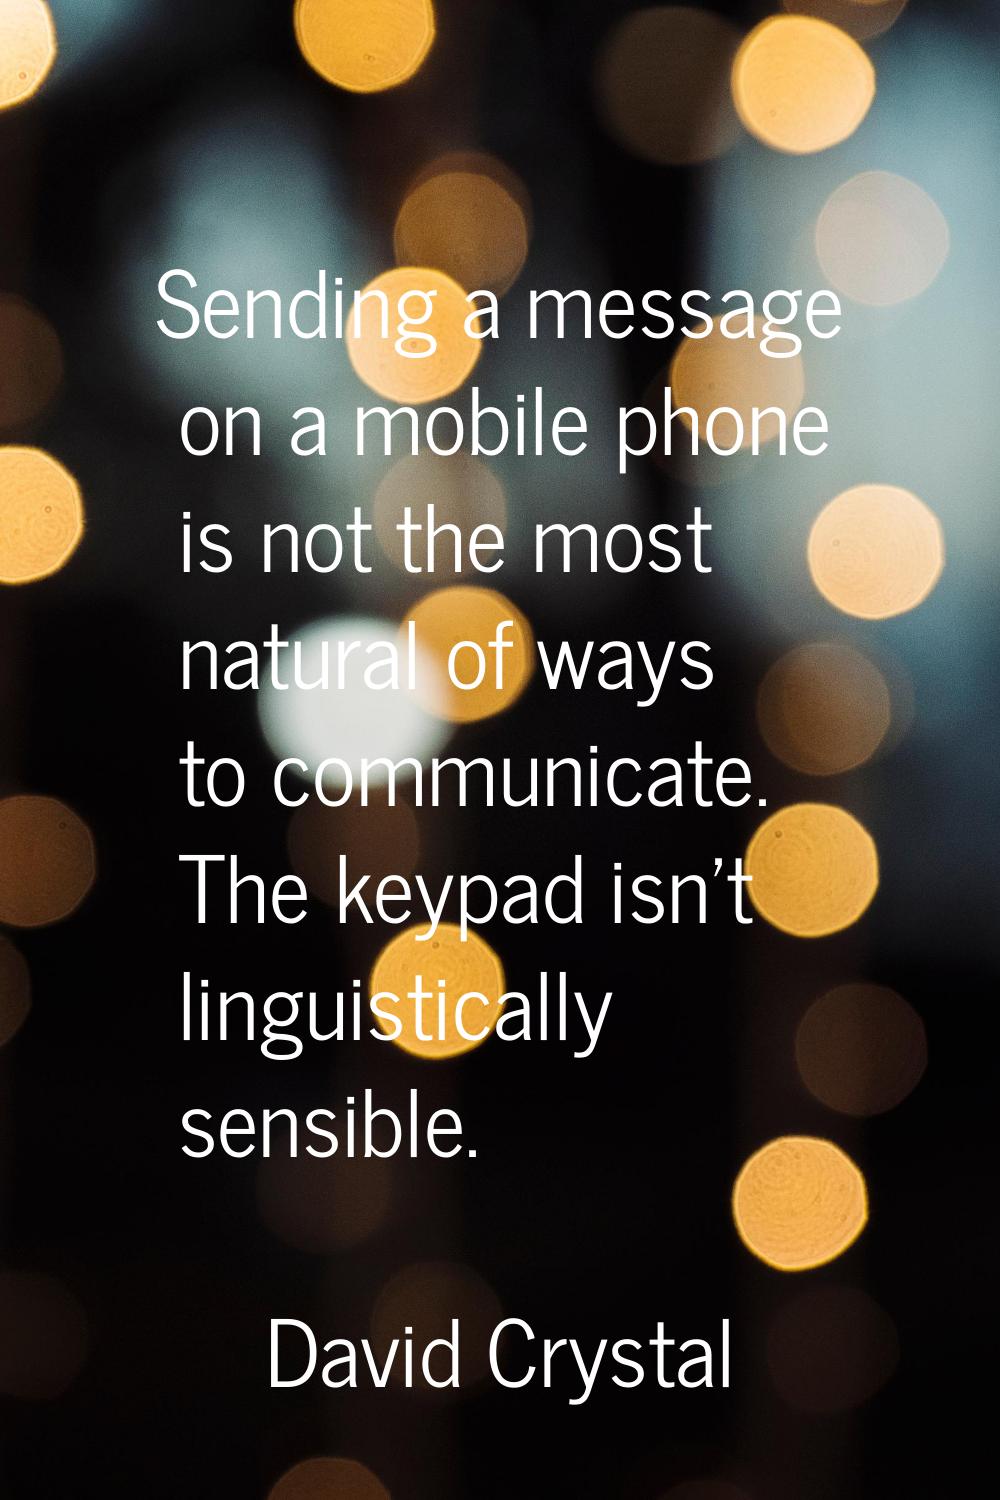 Sending a message on a mobile phone is not the most natural of ways to communicate. The keypad isn'